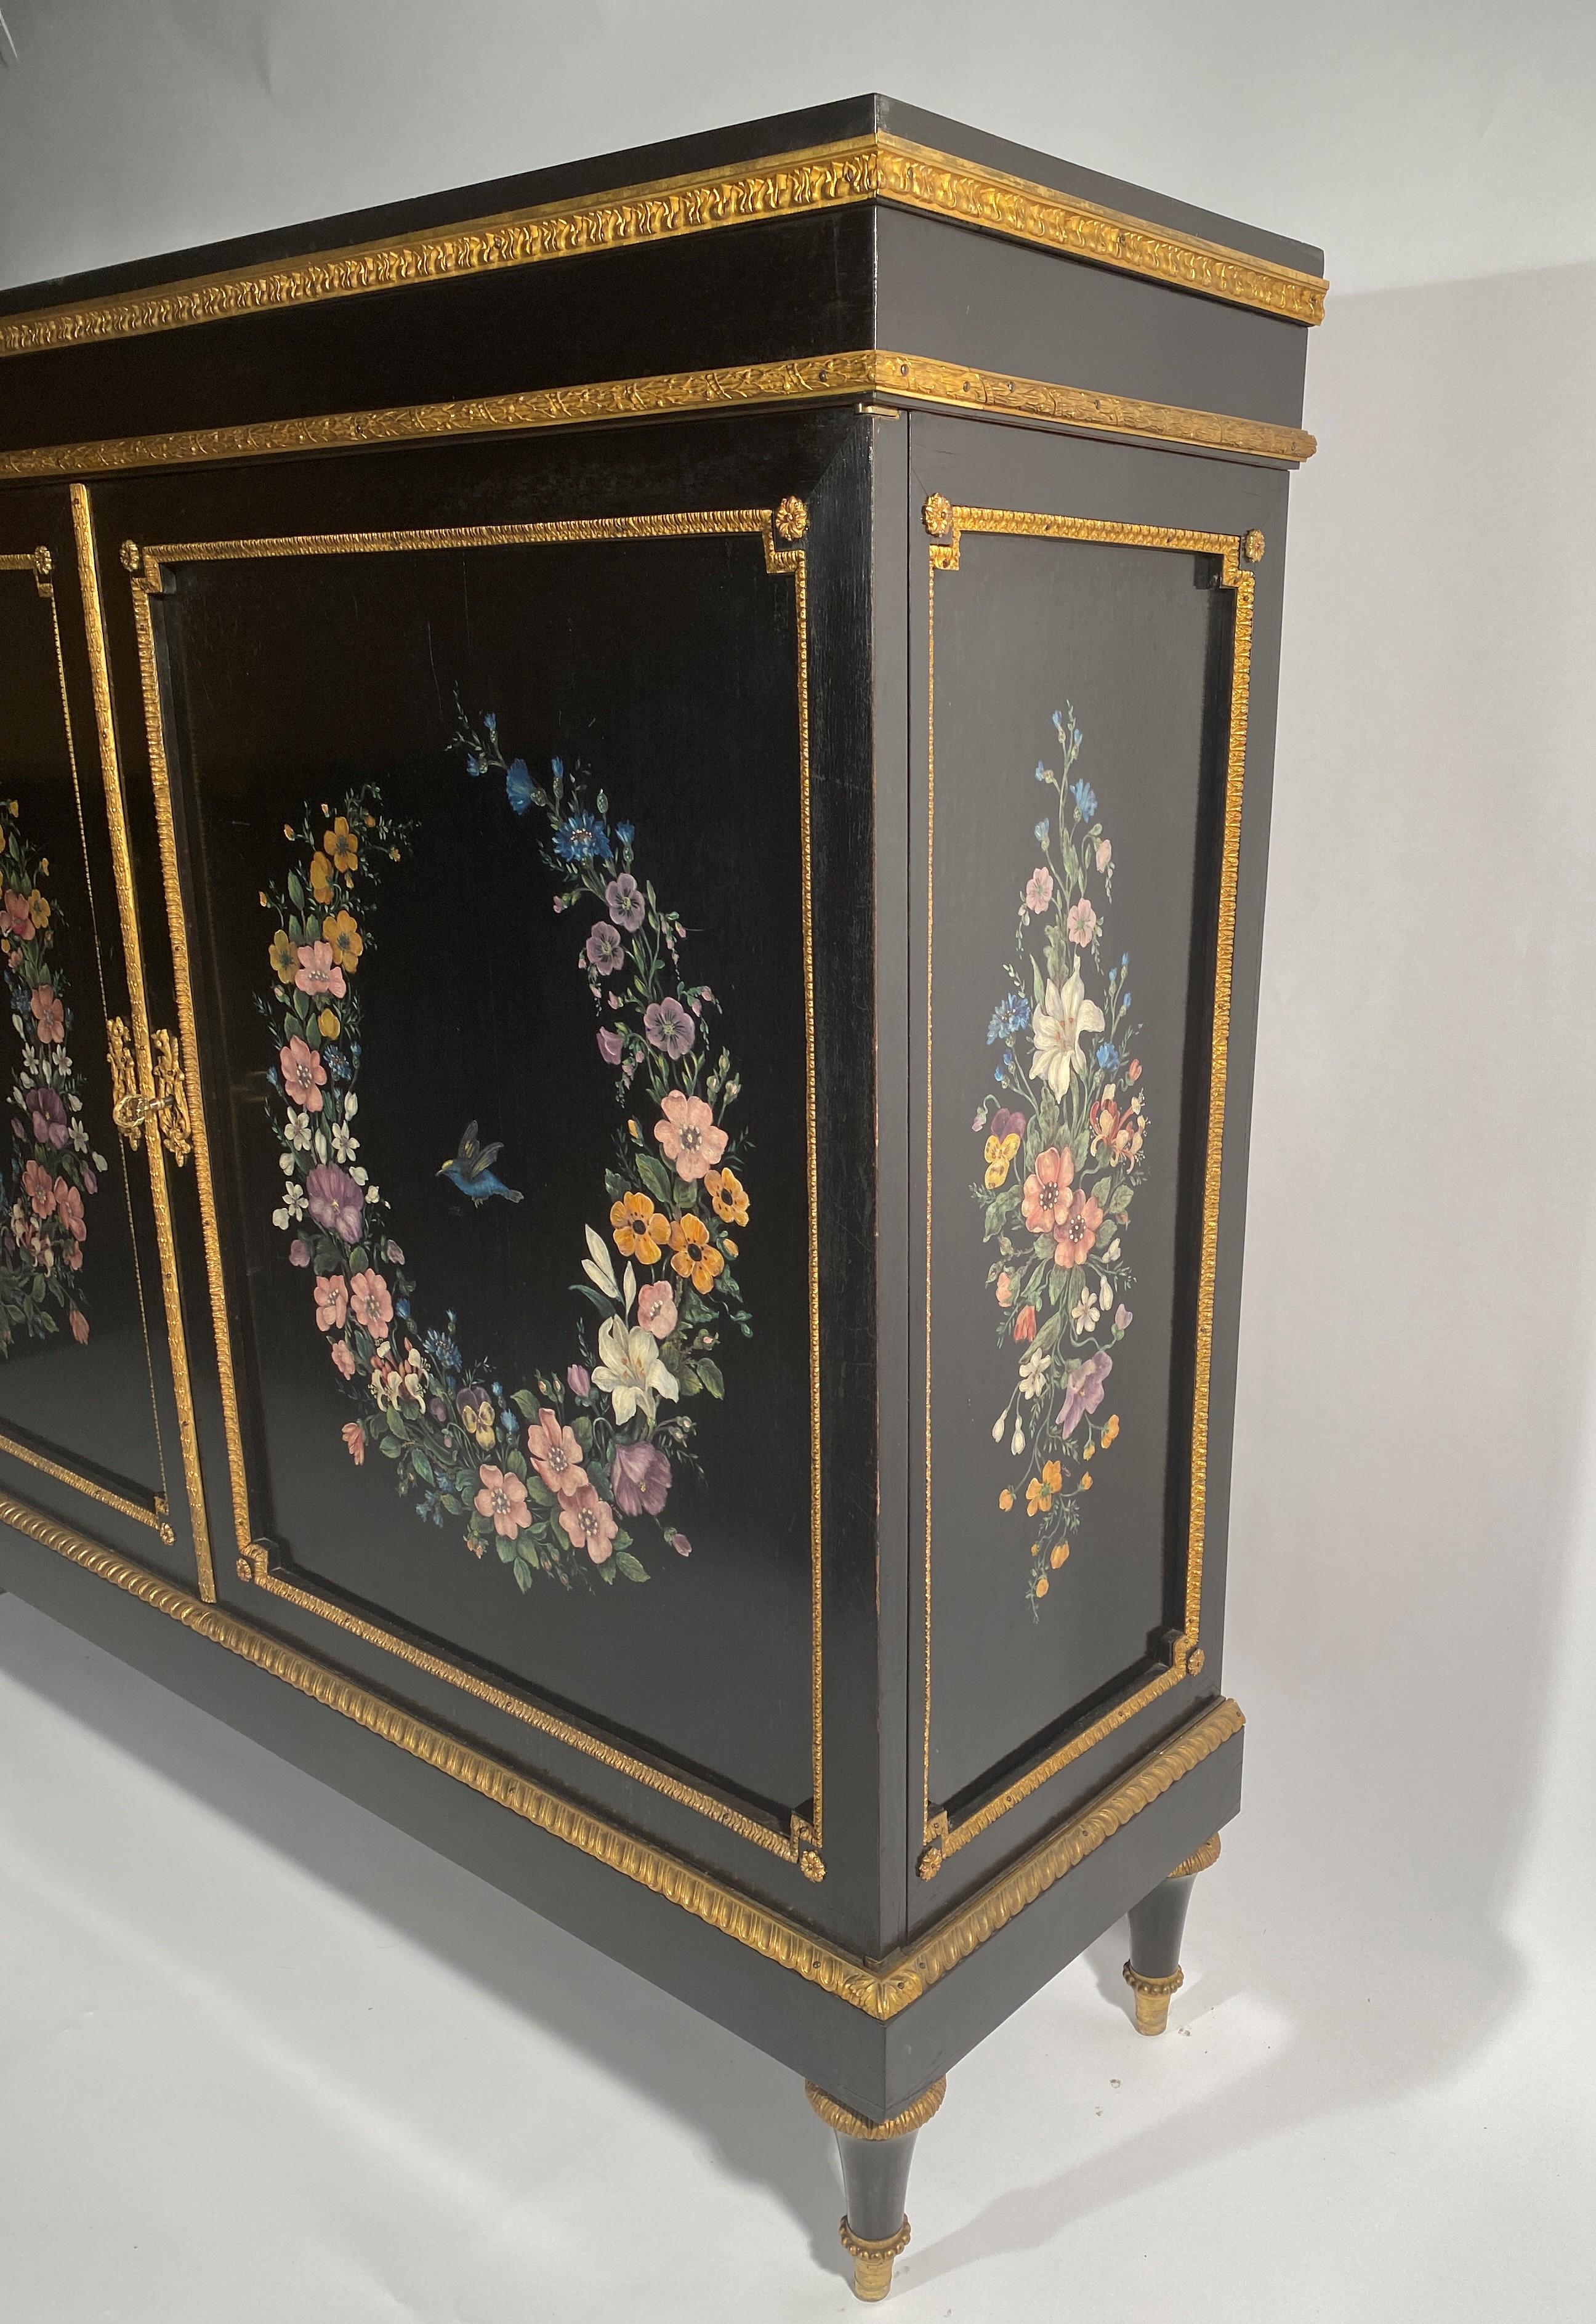 Rare lacquer buffet on a black background decorated with splendid bouquets of flowers on the sides and garlands surrounding a bird on the front. These flowers are of a very precise quality of execution and the rendering is simply magnificent.
It